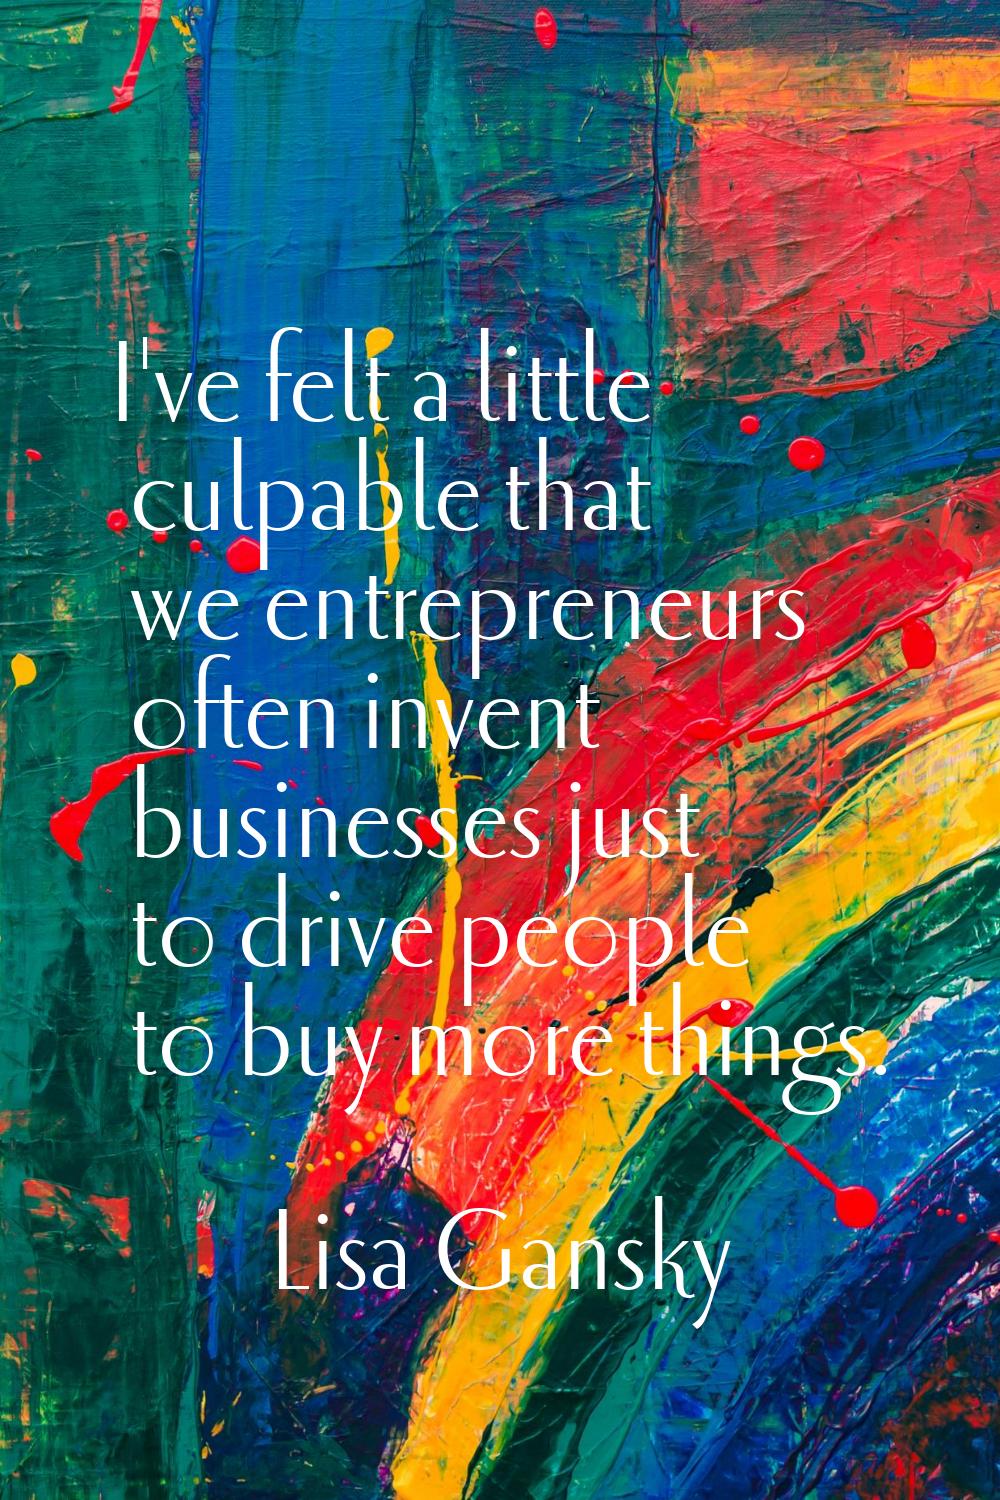 I've felt a little culpable that we entrepreneurs often invent businesses just to drive people to b